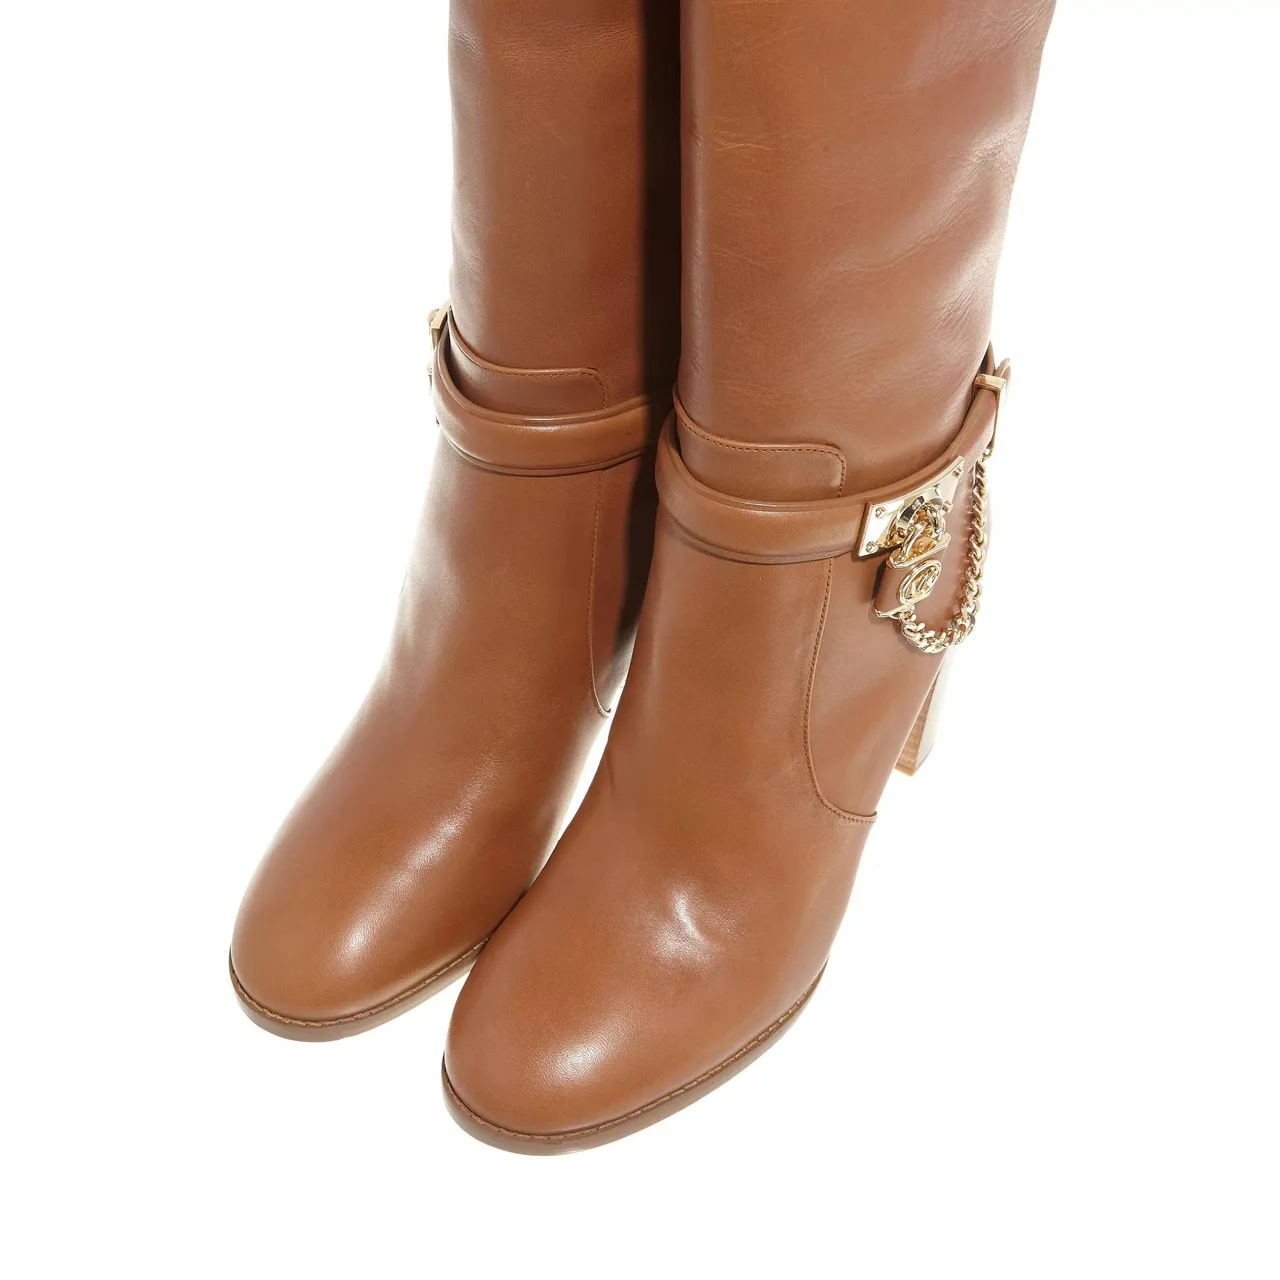 Michael Kors Boots & Ankle Boots - Hamilton Heeled Boot - brown - Boots & Ankle Boots for ladies